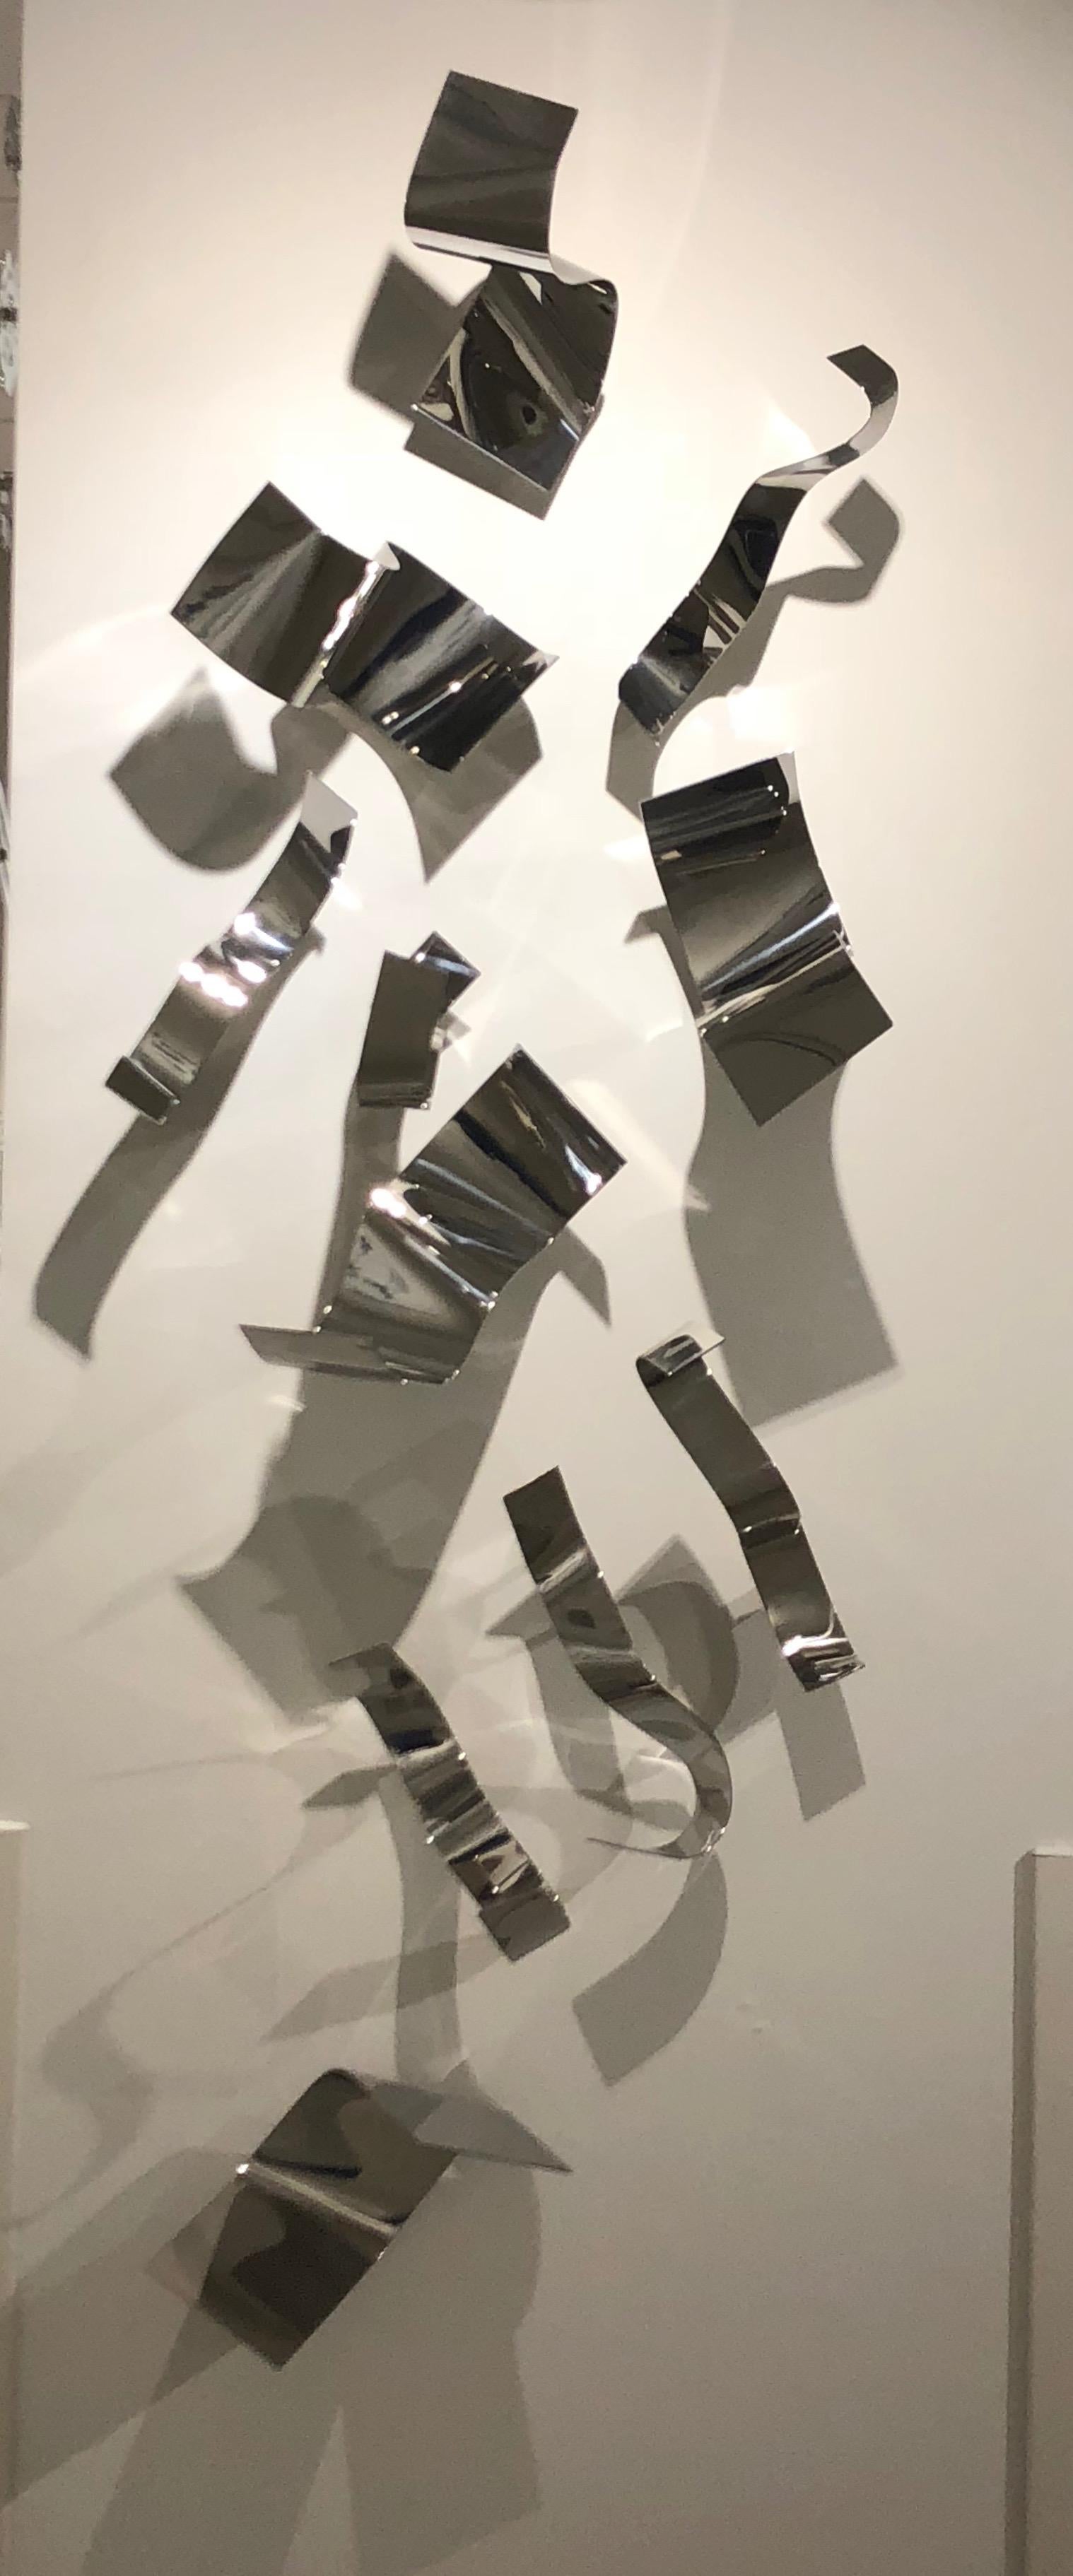 Zammy Migdal Abstract Sculpture - Eleven Minors and You high polished Chrome metal elements Zammy  Migdal 2018